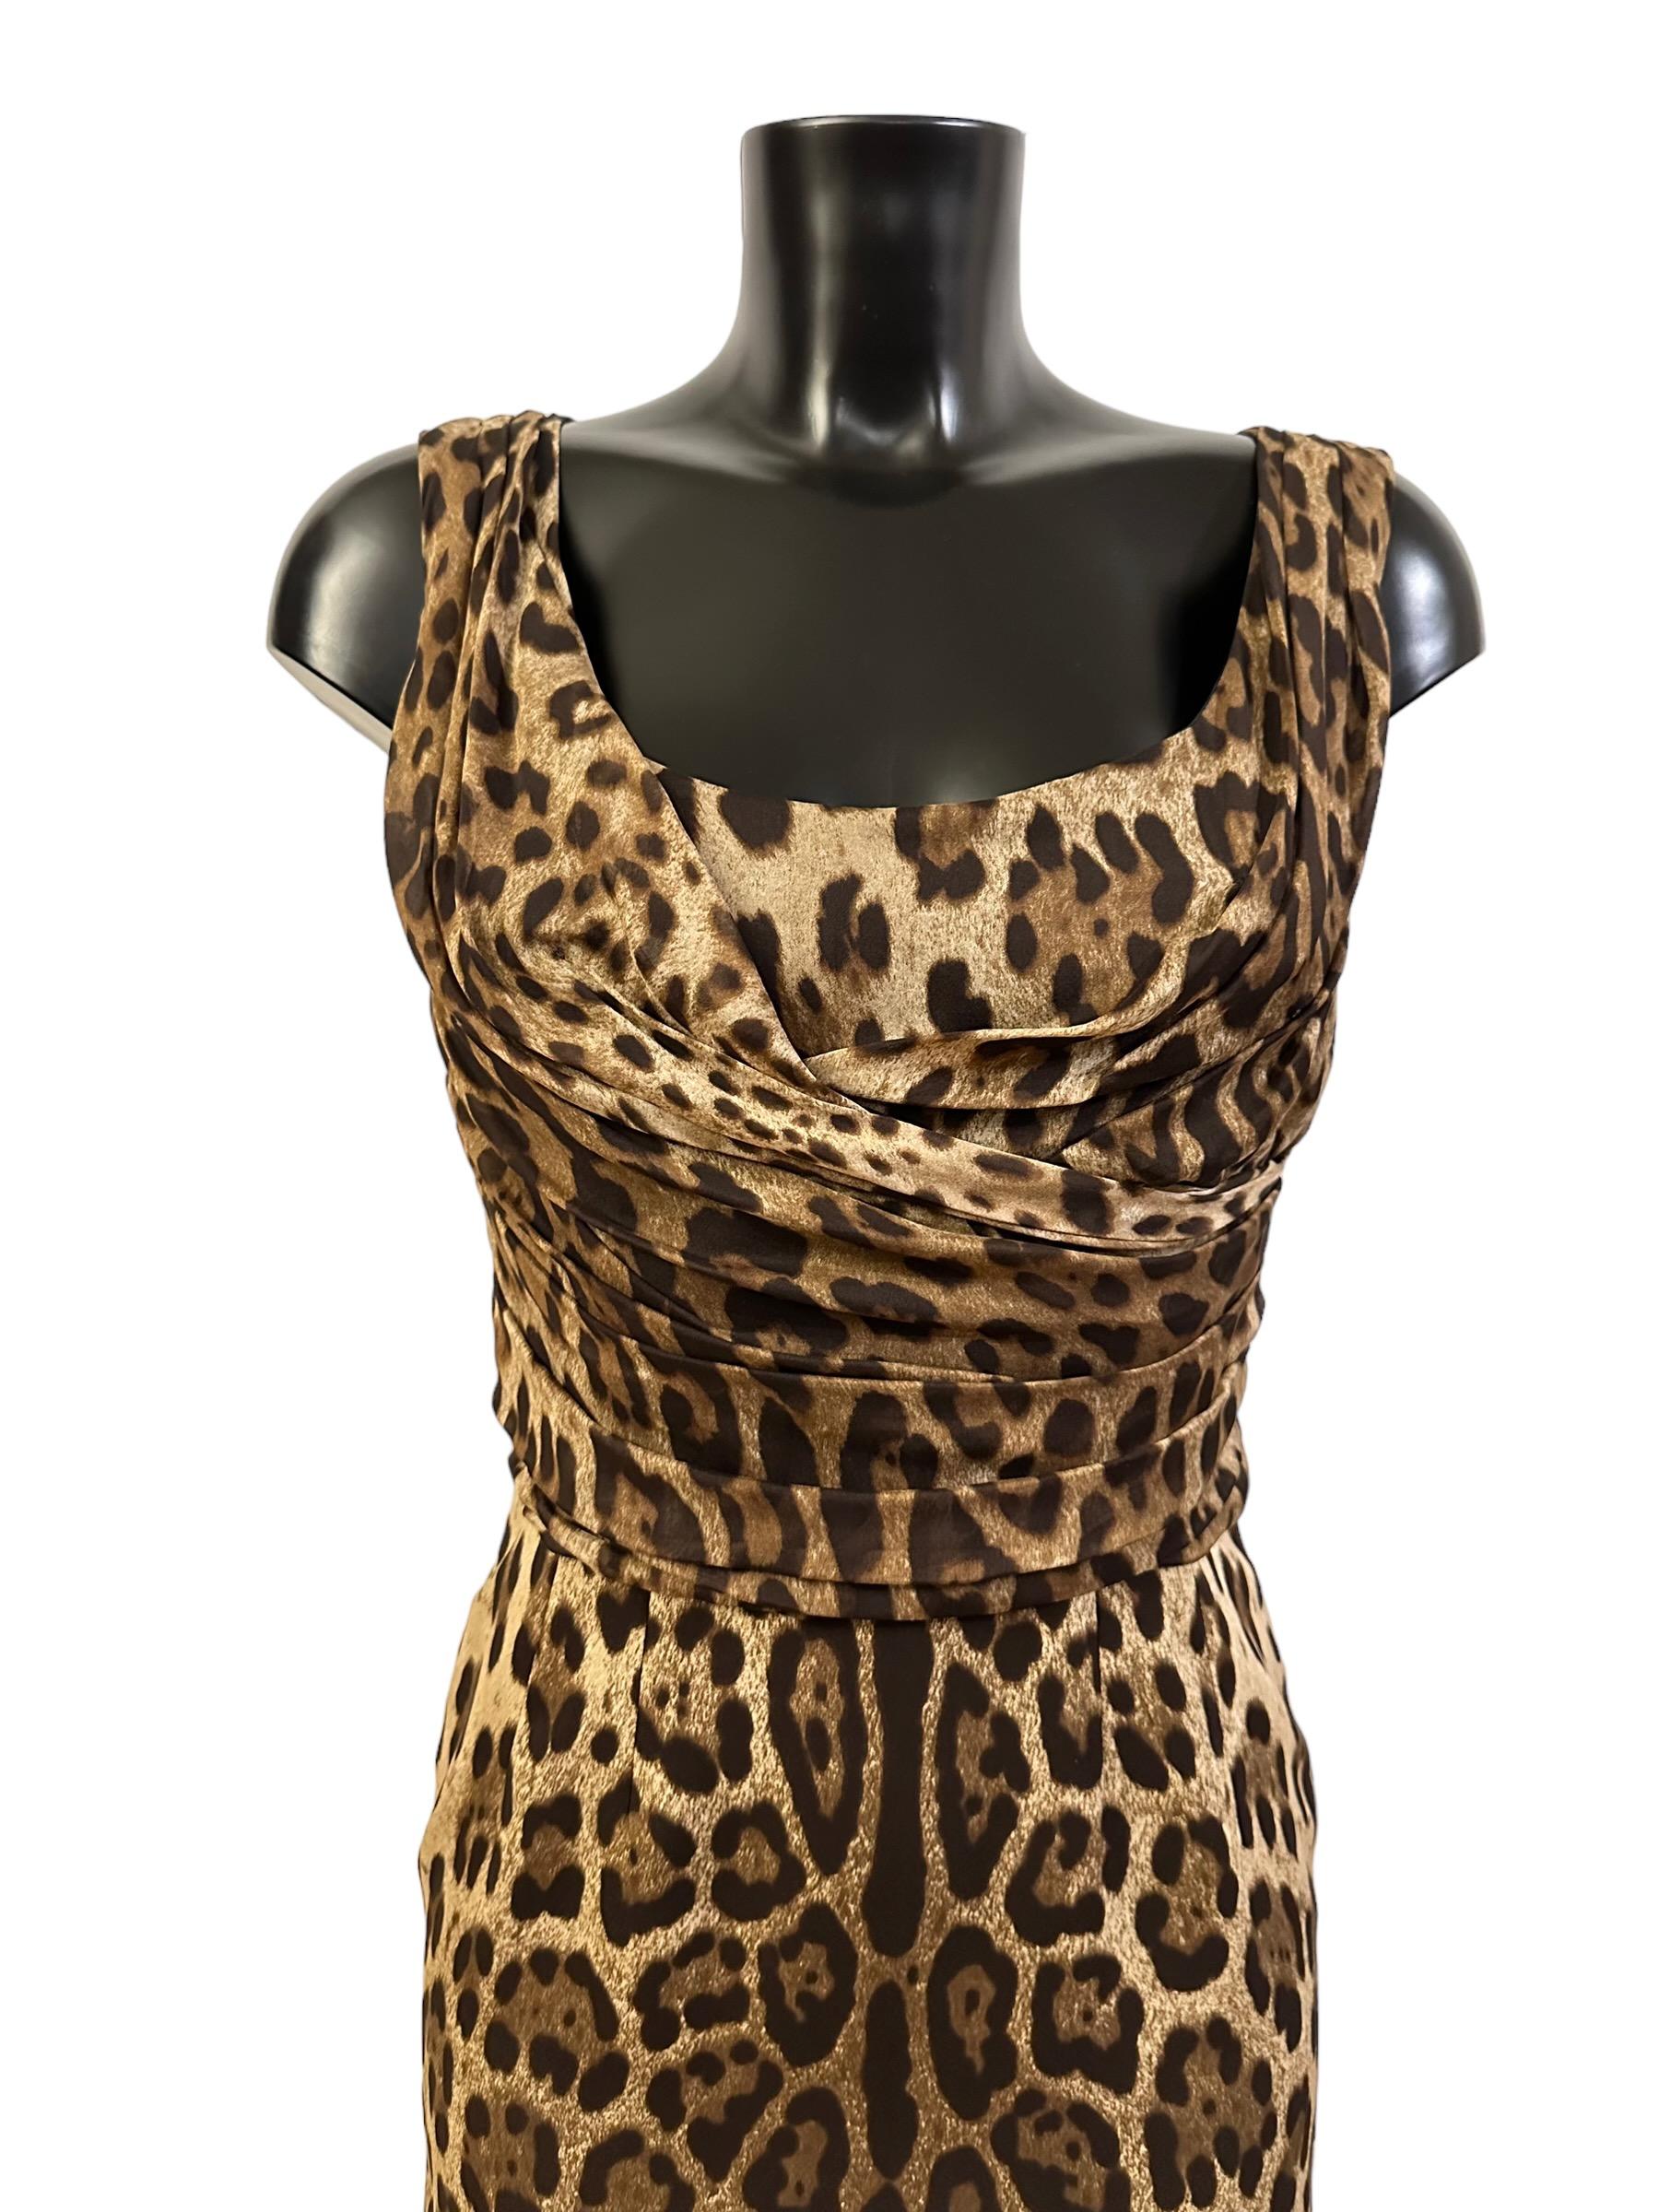 This pre-owned dress from the house of Dolce & Gabbana is crafted in a beautiful iconic animal print silk. It features a drappé in the front down the waistline and is sleeveless.

Fabric: 95% silk - 5% Elastane
Lining: 96% silk - 4% Elastane
Color: